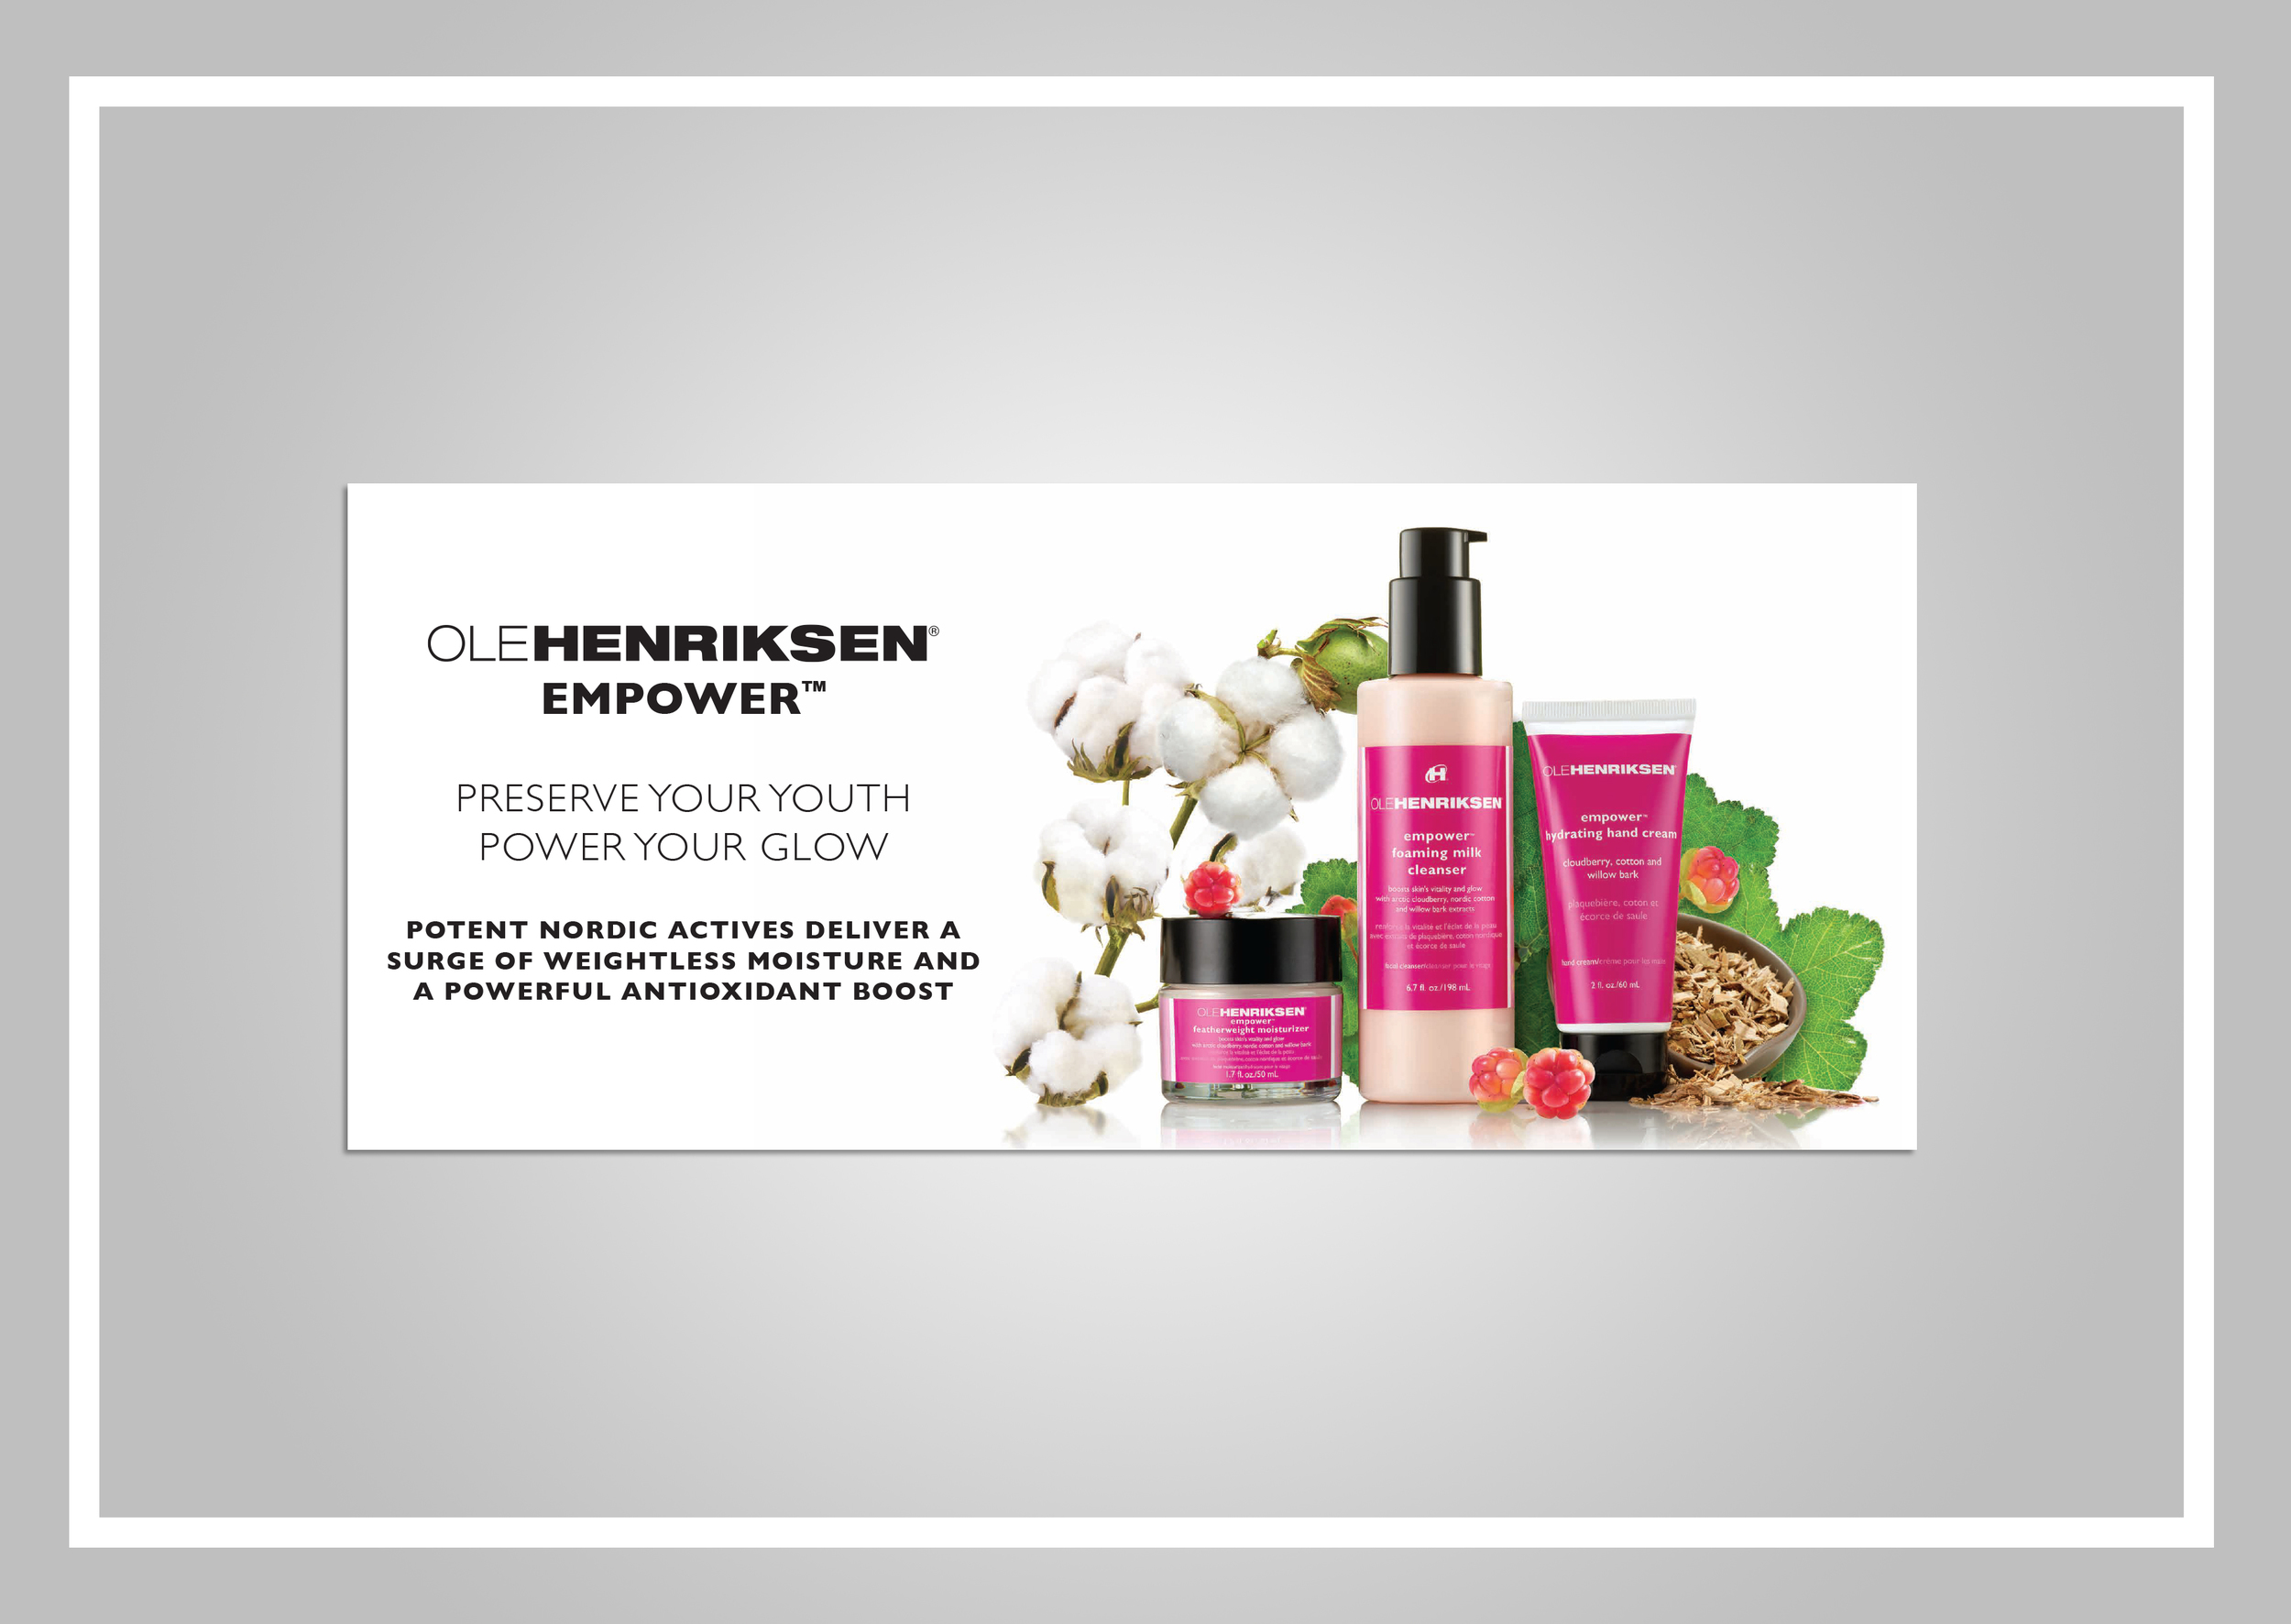  Site billboard graphic for Empower collection launch at Ole Henriksen 